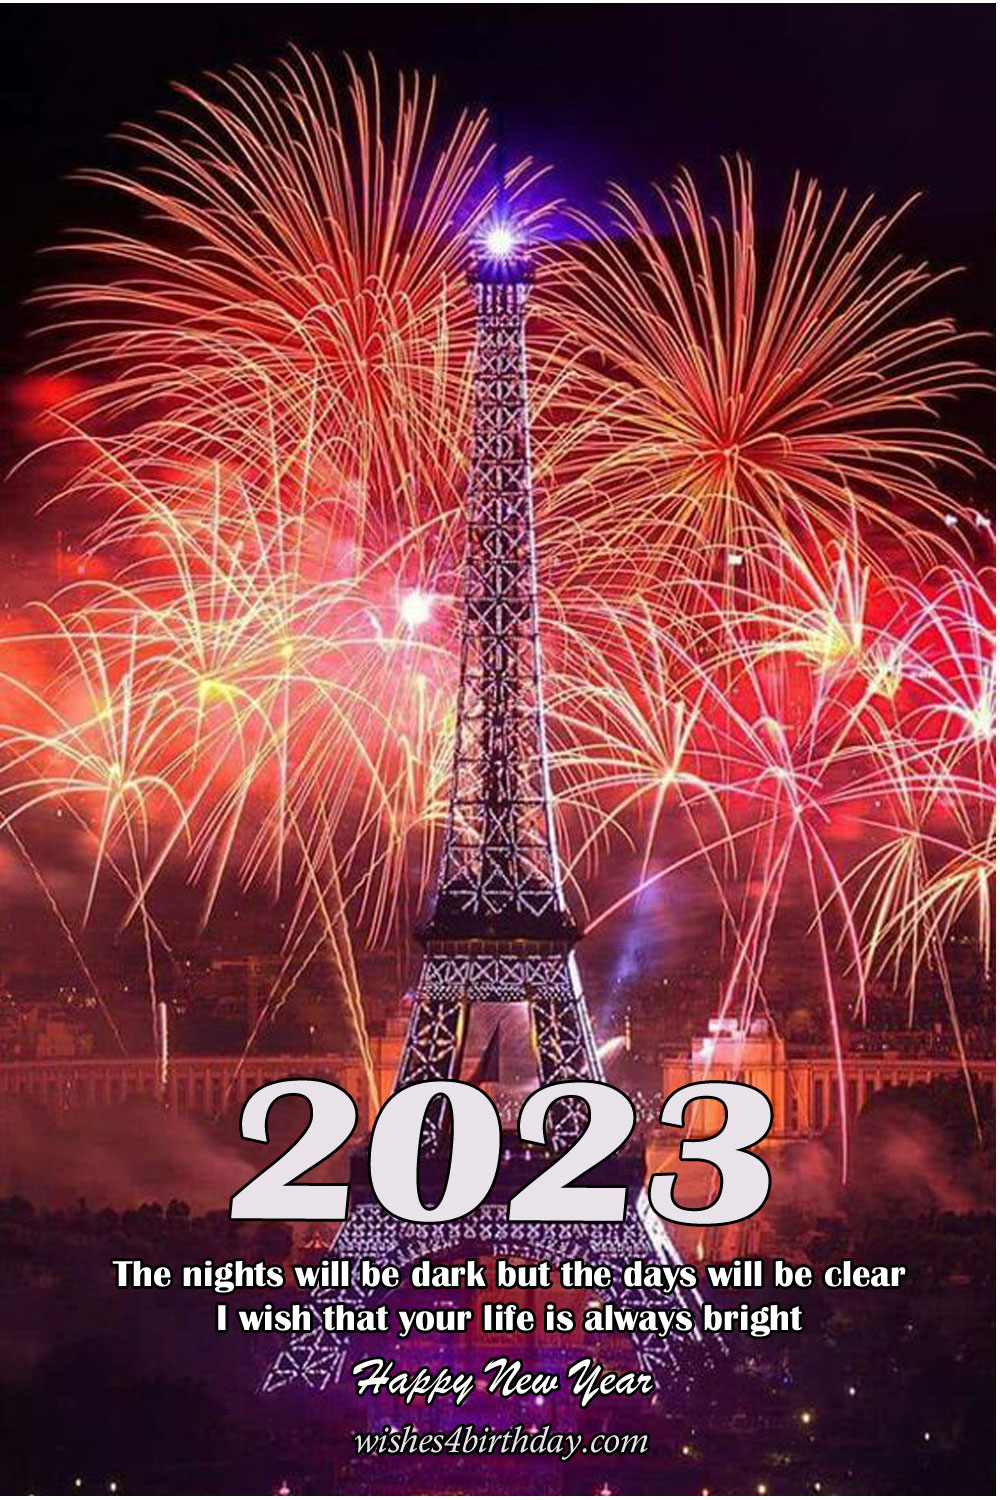 Happy New Year The Days Will Be Clear 2023 - Happy Birthday Wishes ...